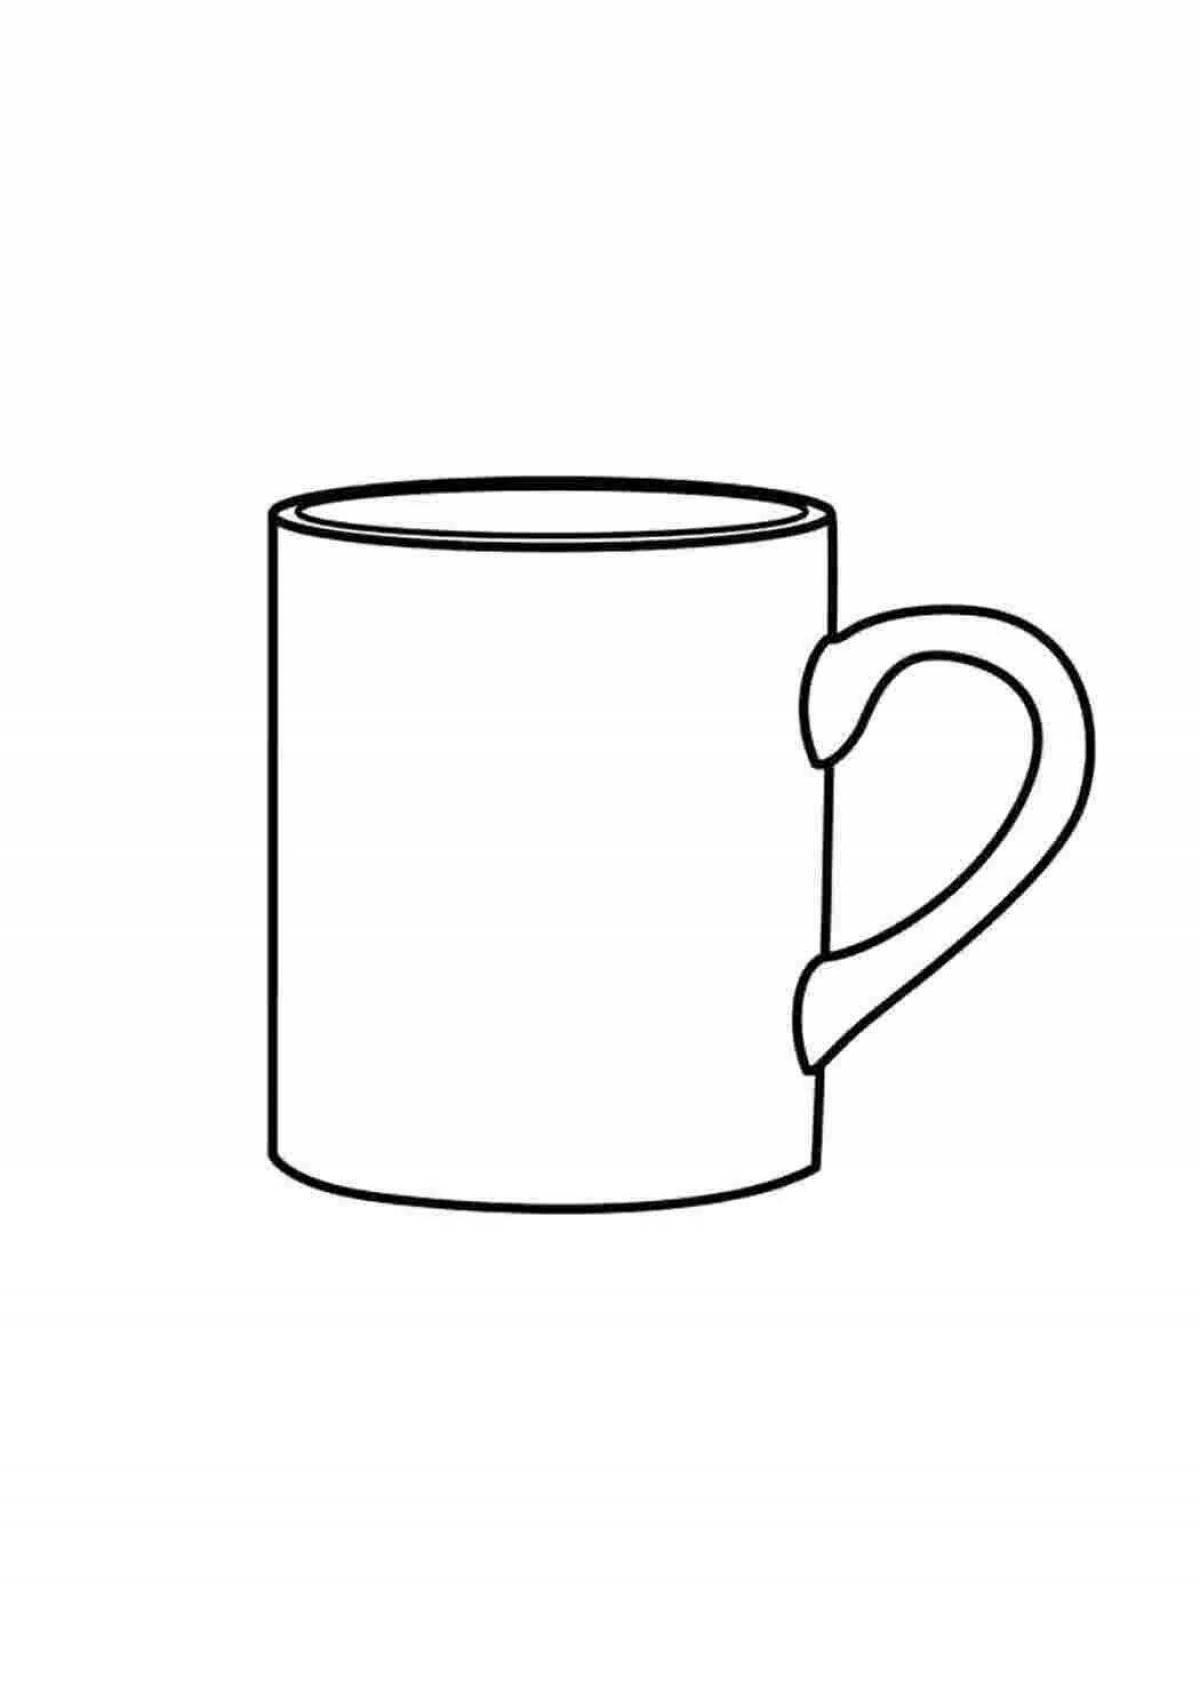 Festive cup coloring page